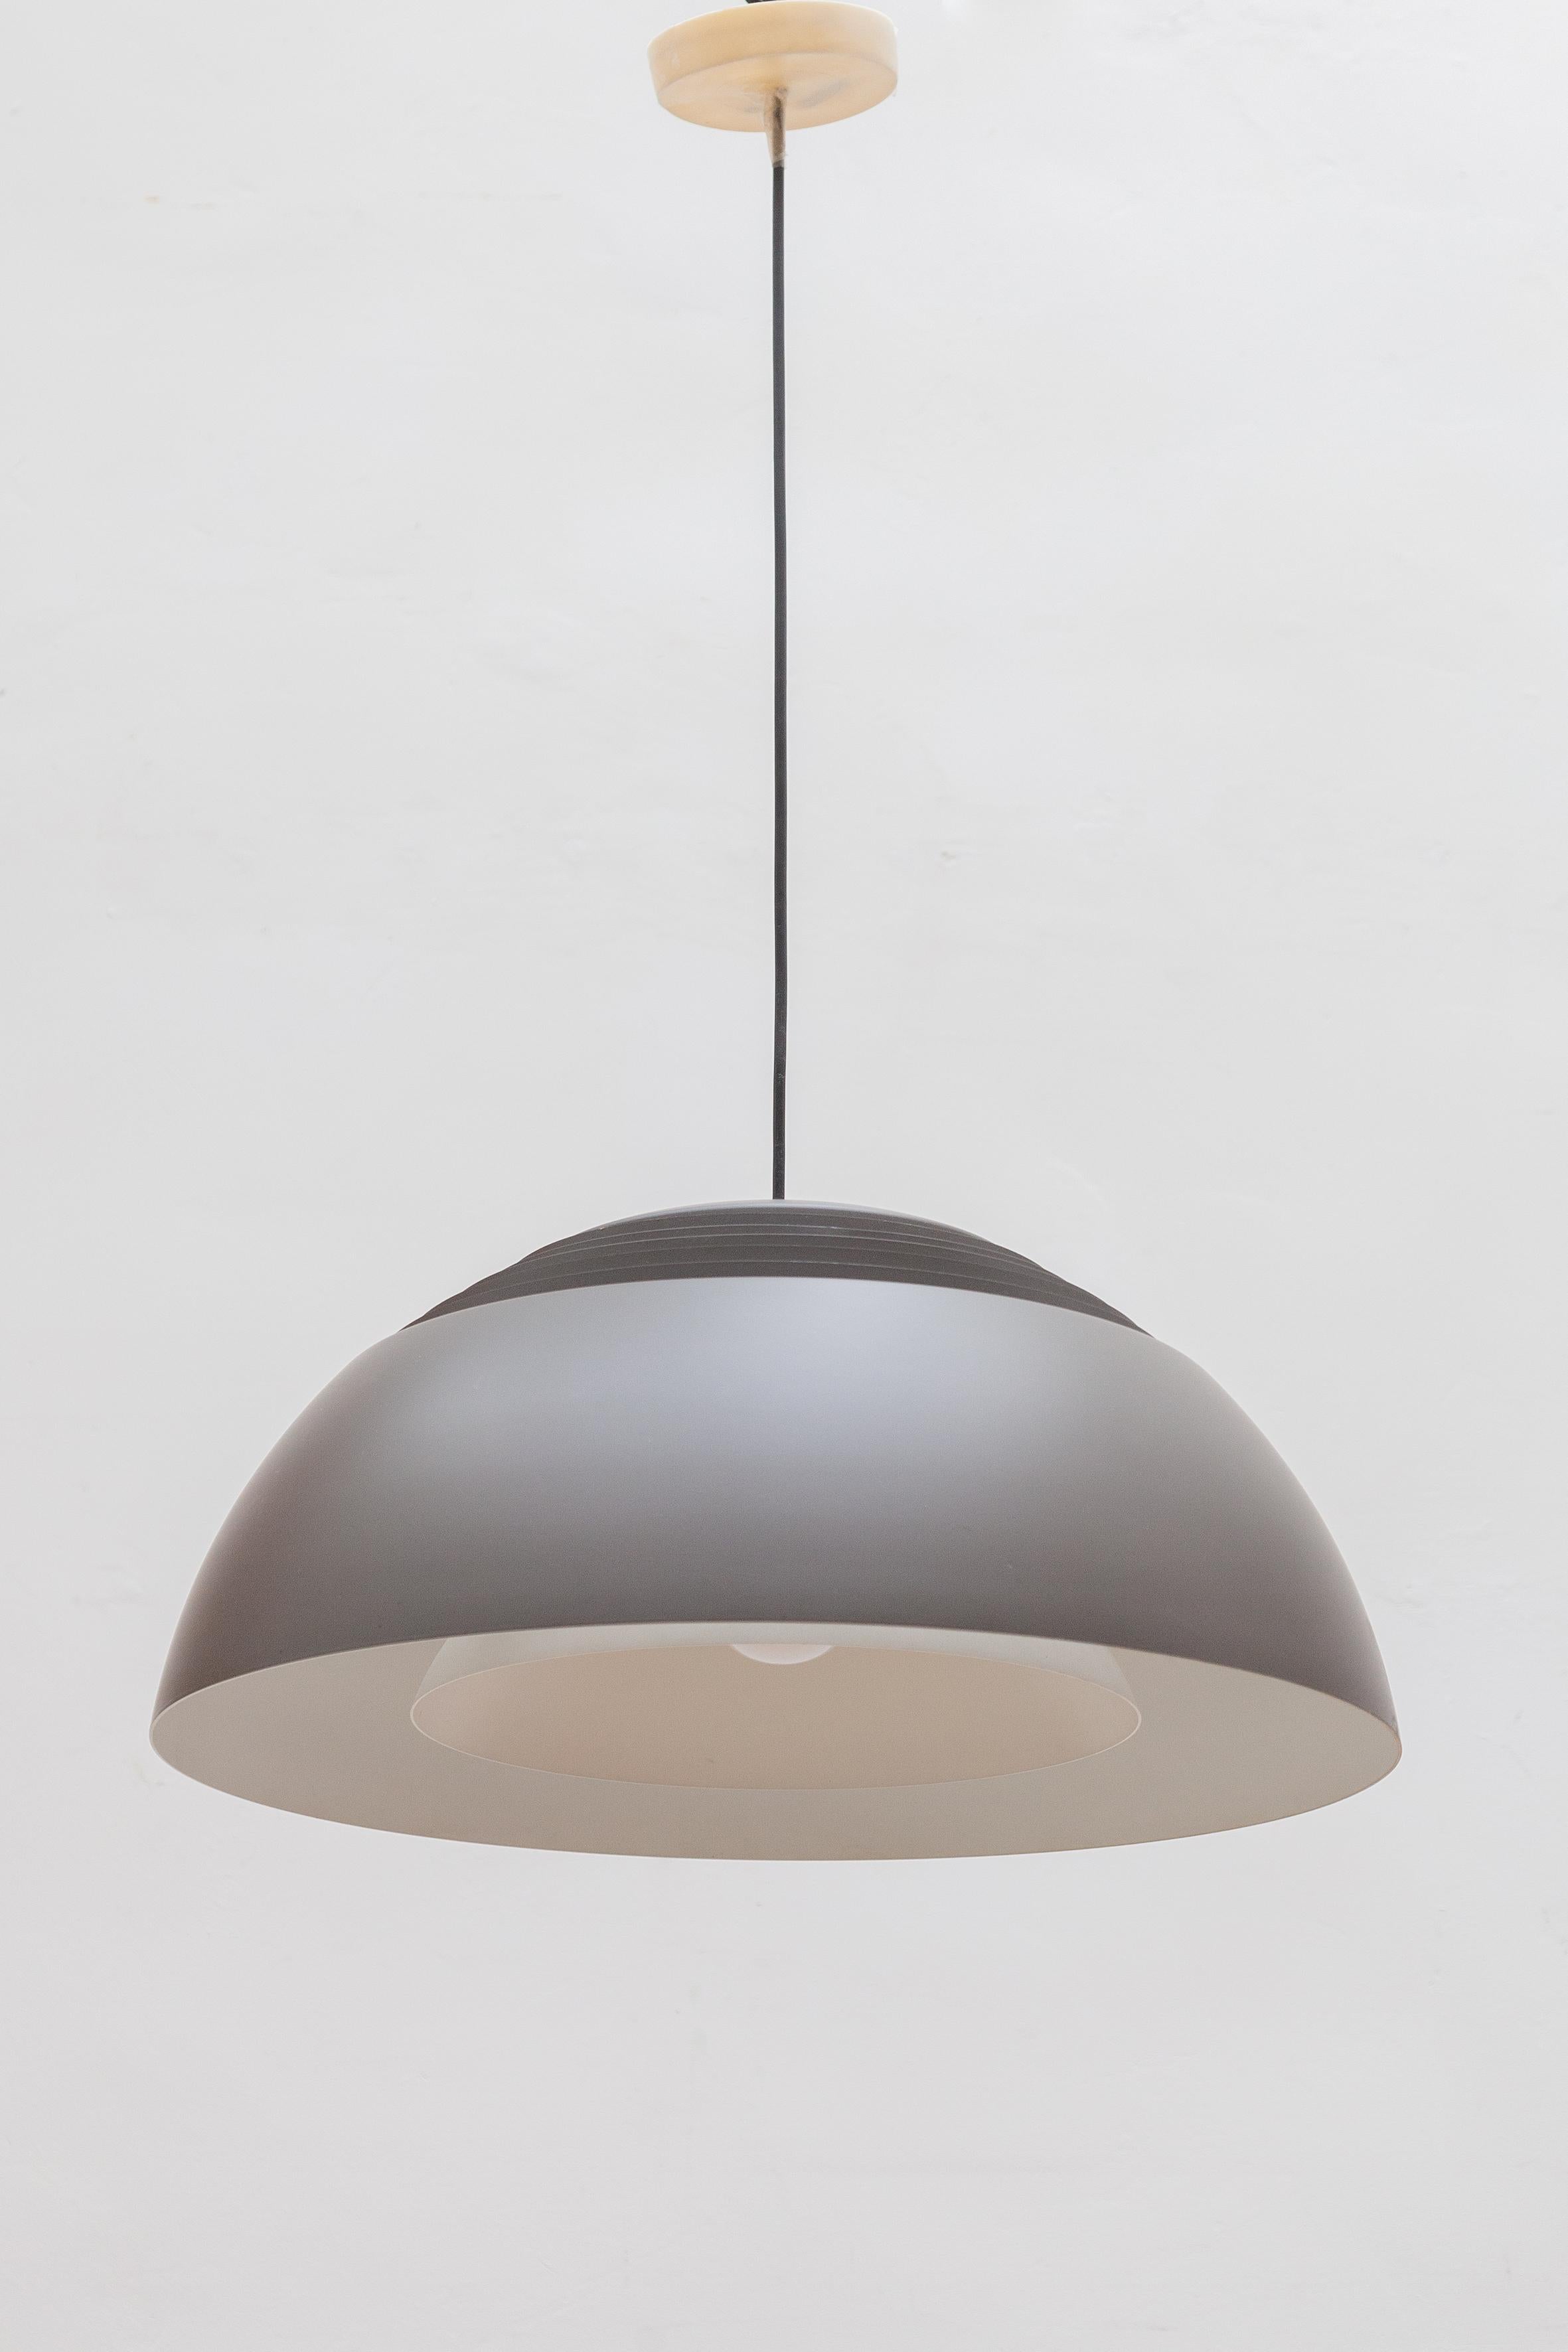 Brown Modern AJ Royal pendant designed by Arne Jacobsen produced by Louis Poulsen, Made in Denmark. The lamp is in good condition. 

 4 x E26/27 Edison screw sockets ready to use with 110 and 250 Volt. 